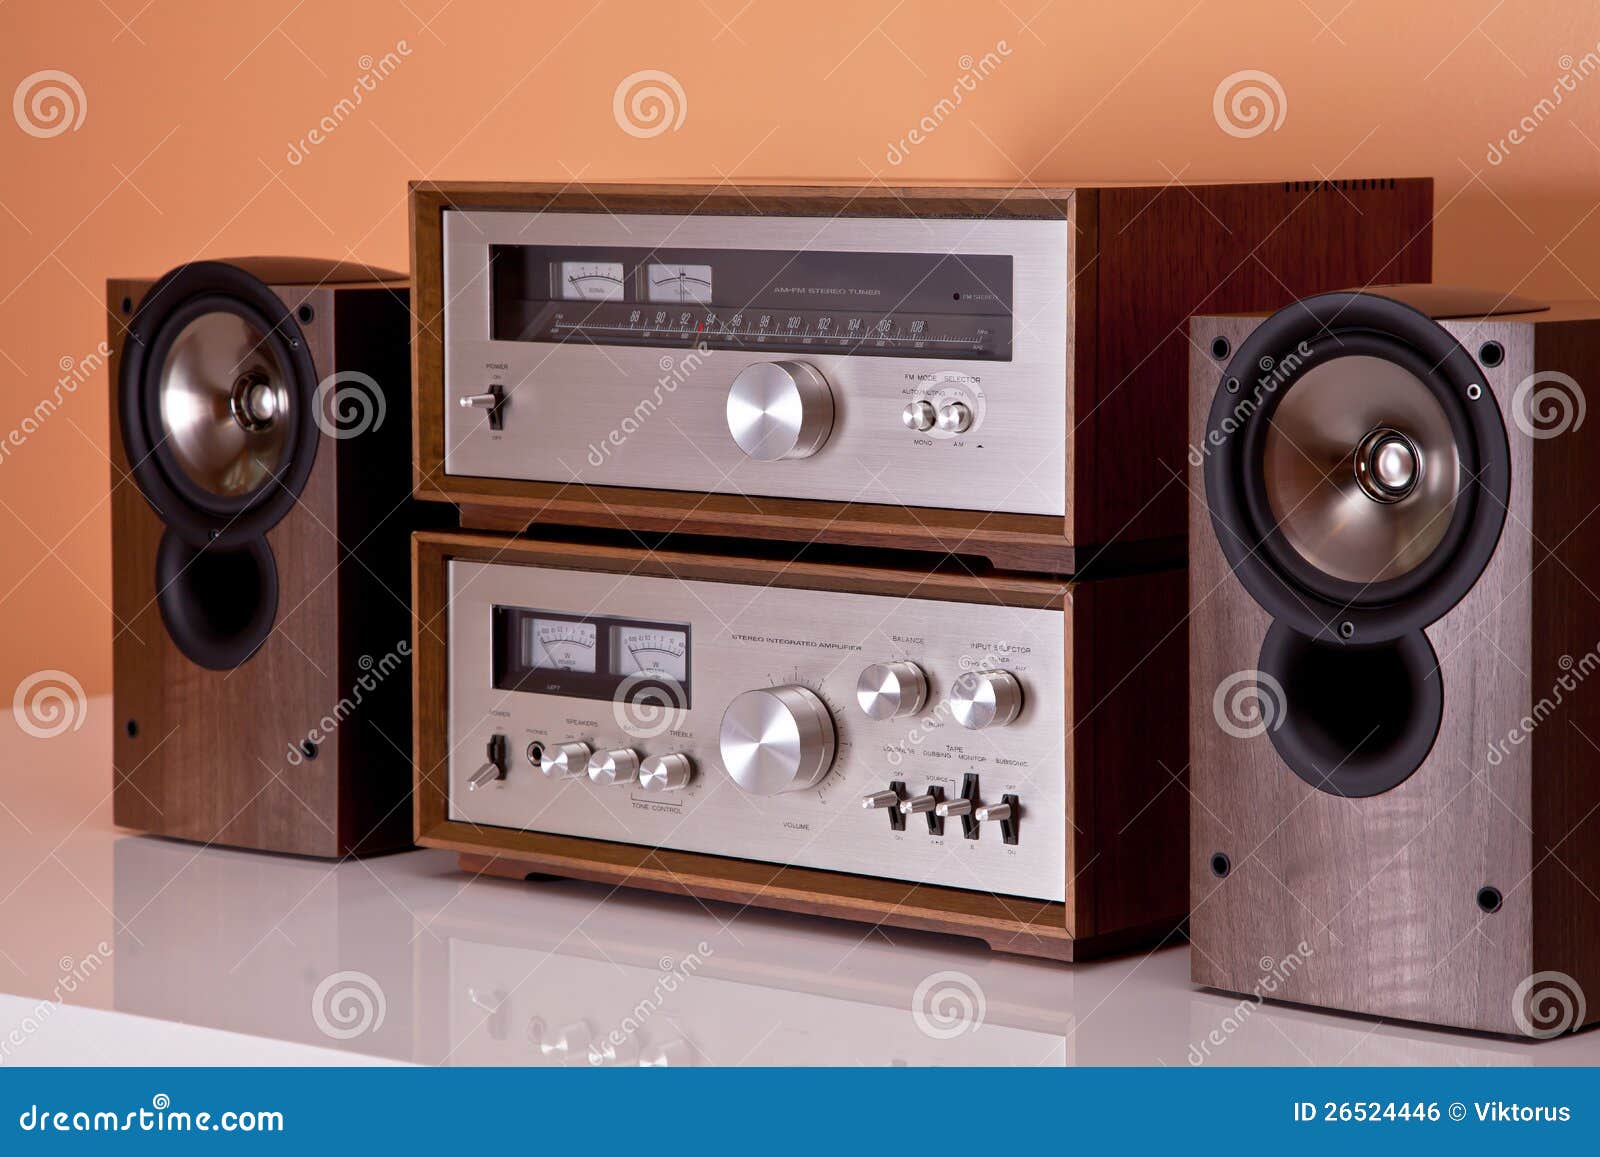 Vintage Stereo Amplifier Tuner Speakers Stock Photo Image Of